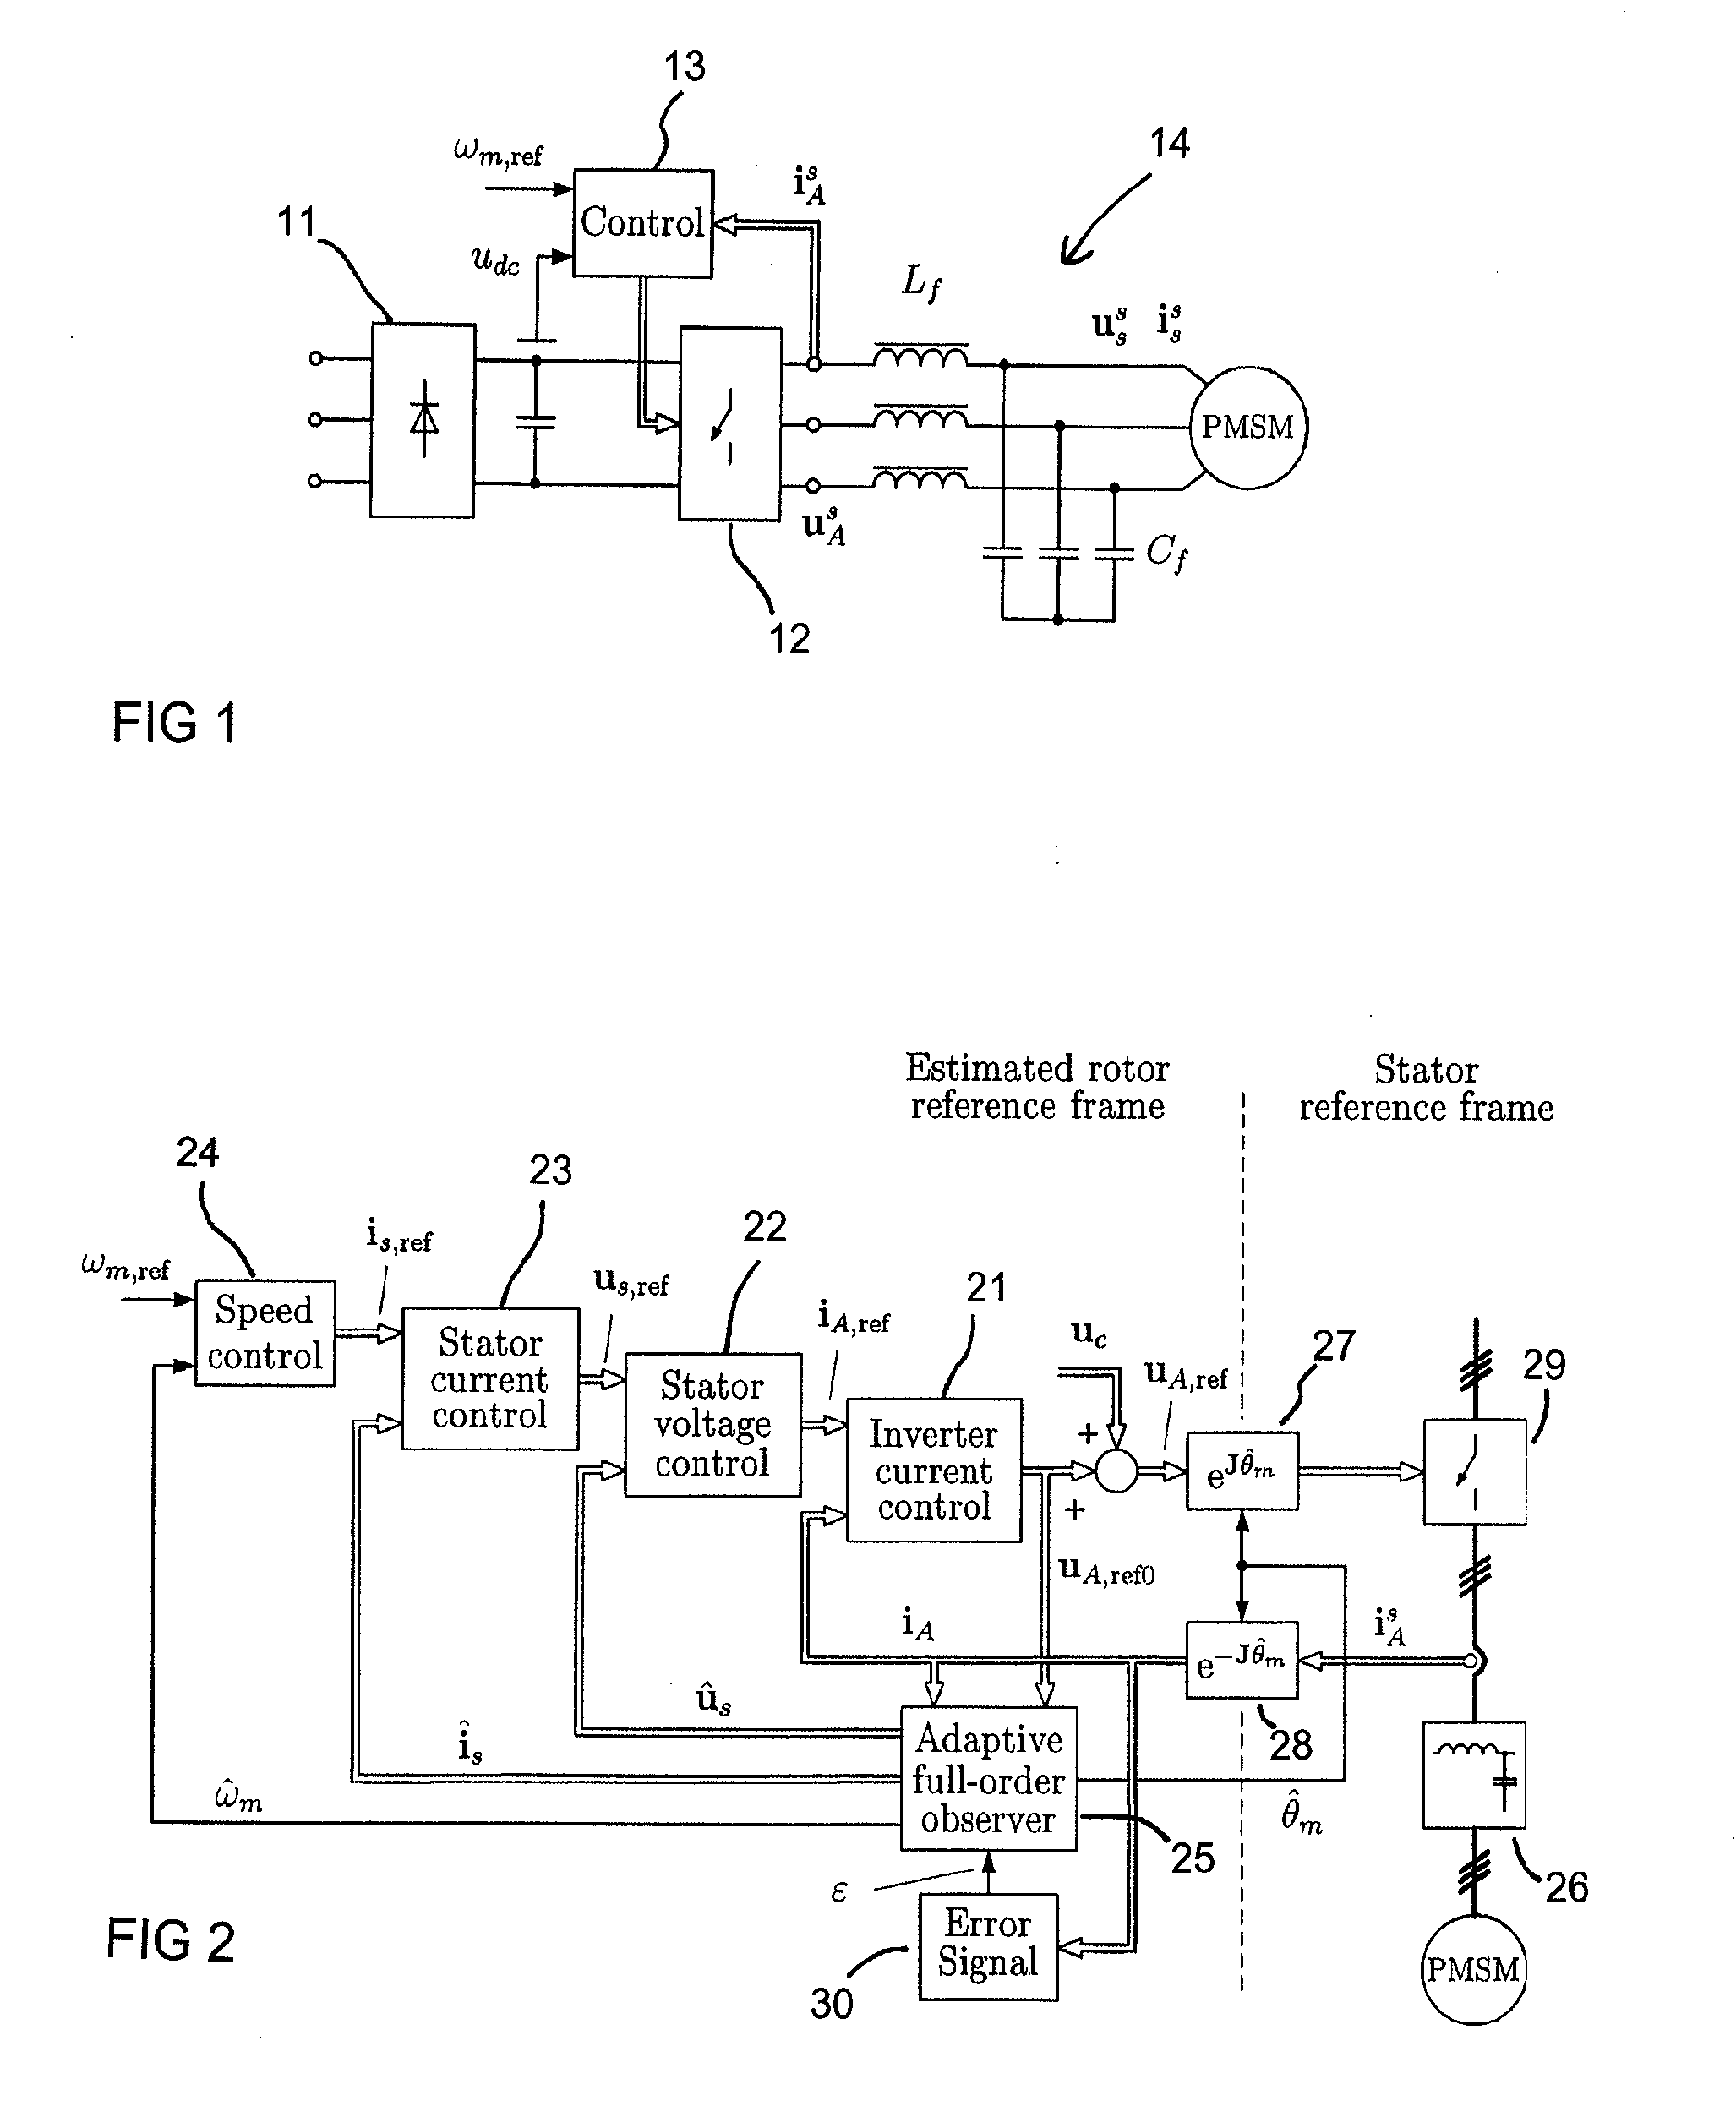 Method and system in connection with permanent magnet synchronous machines